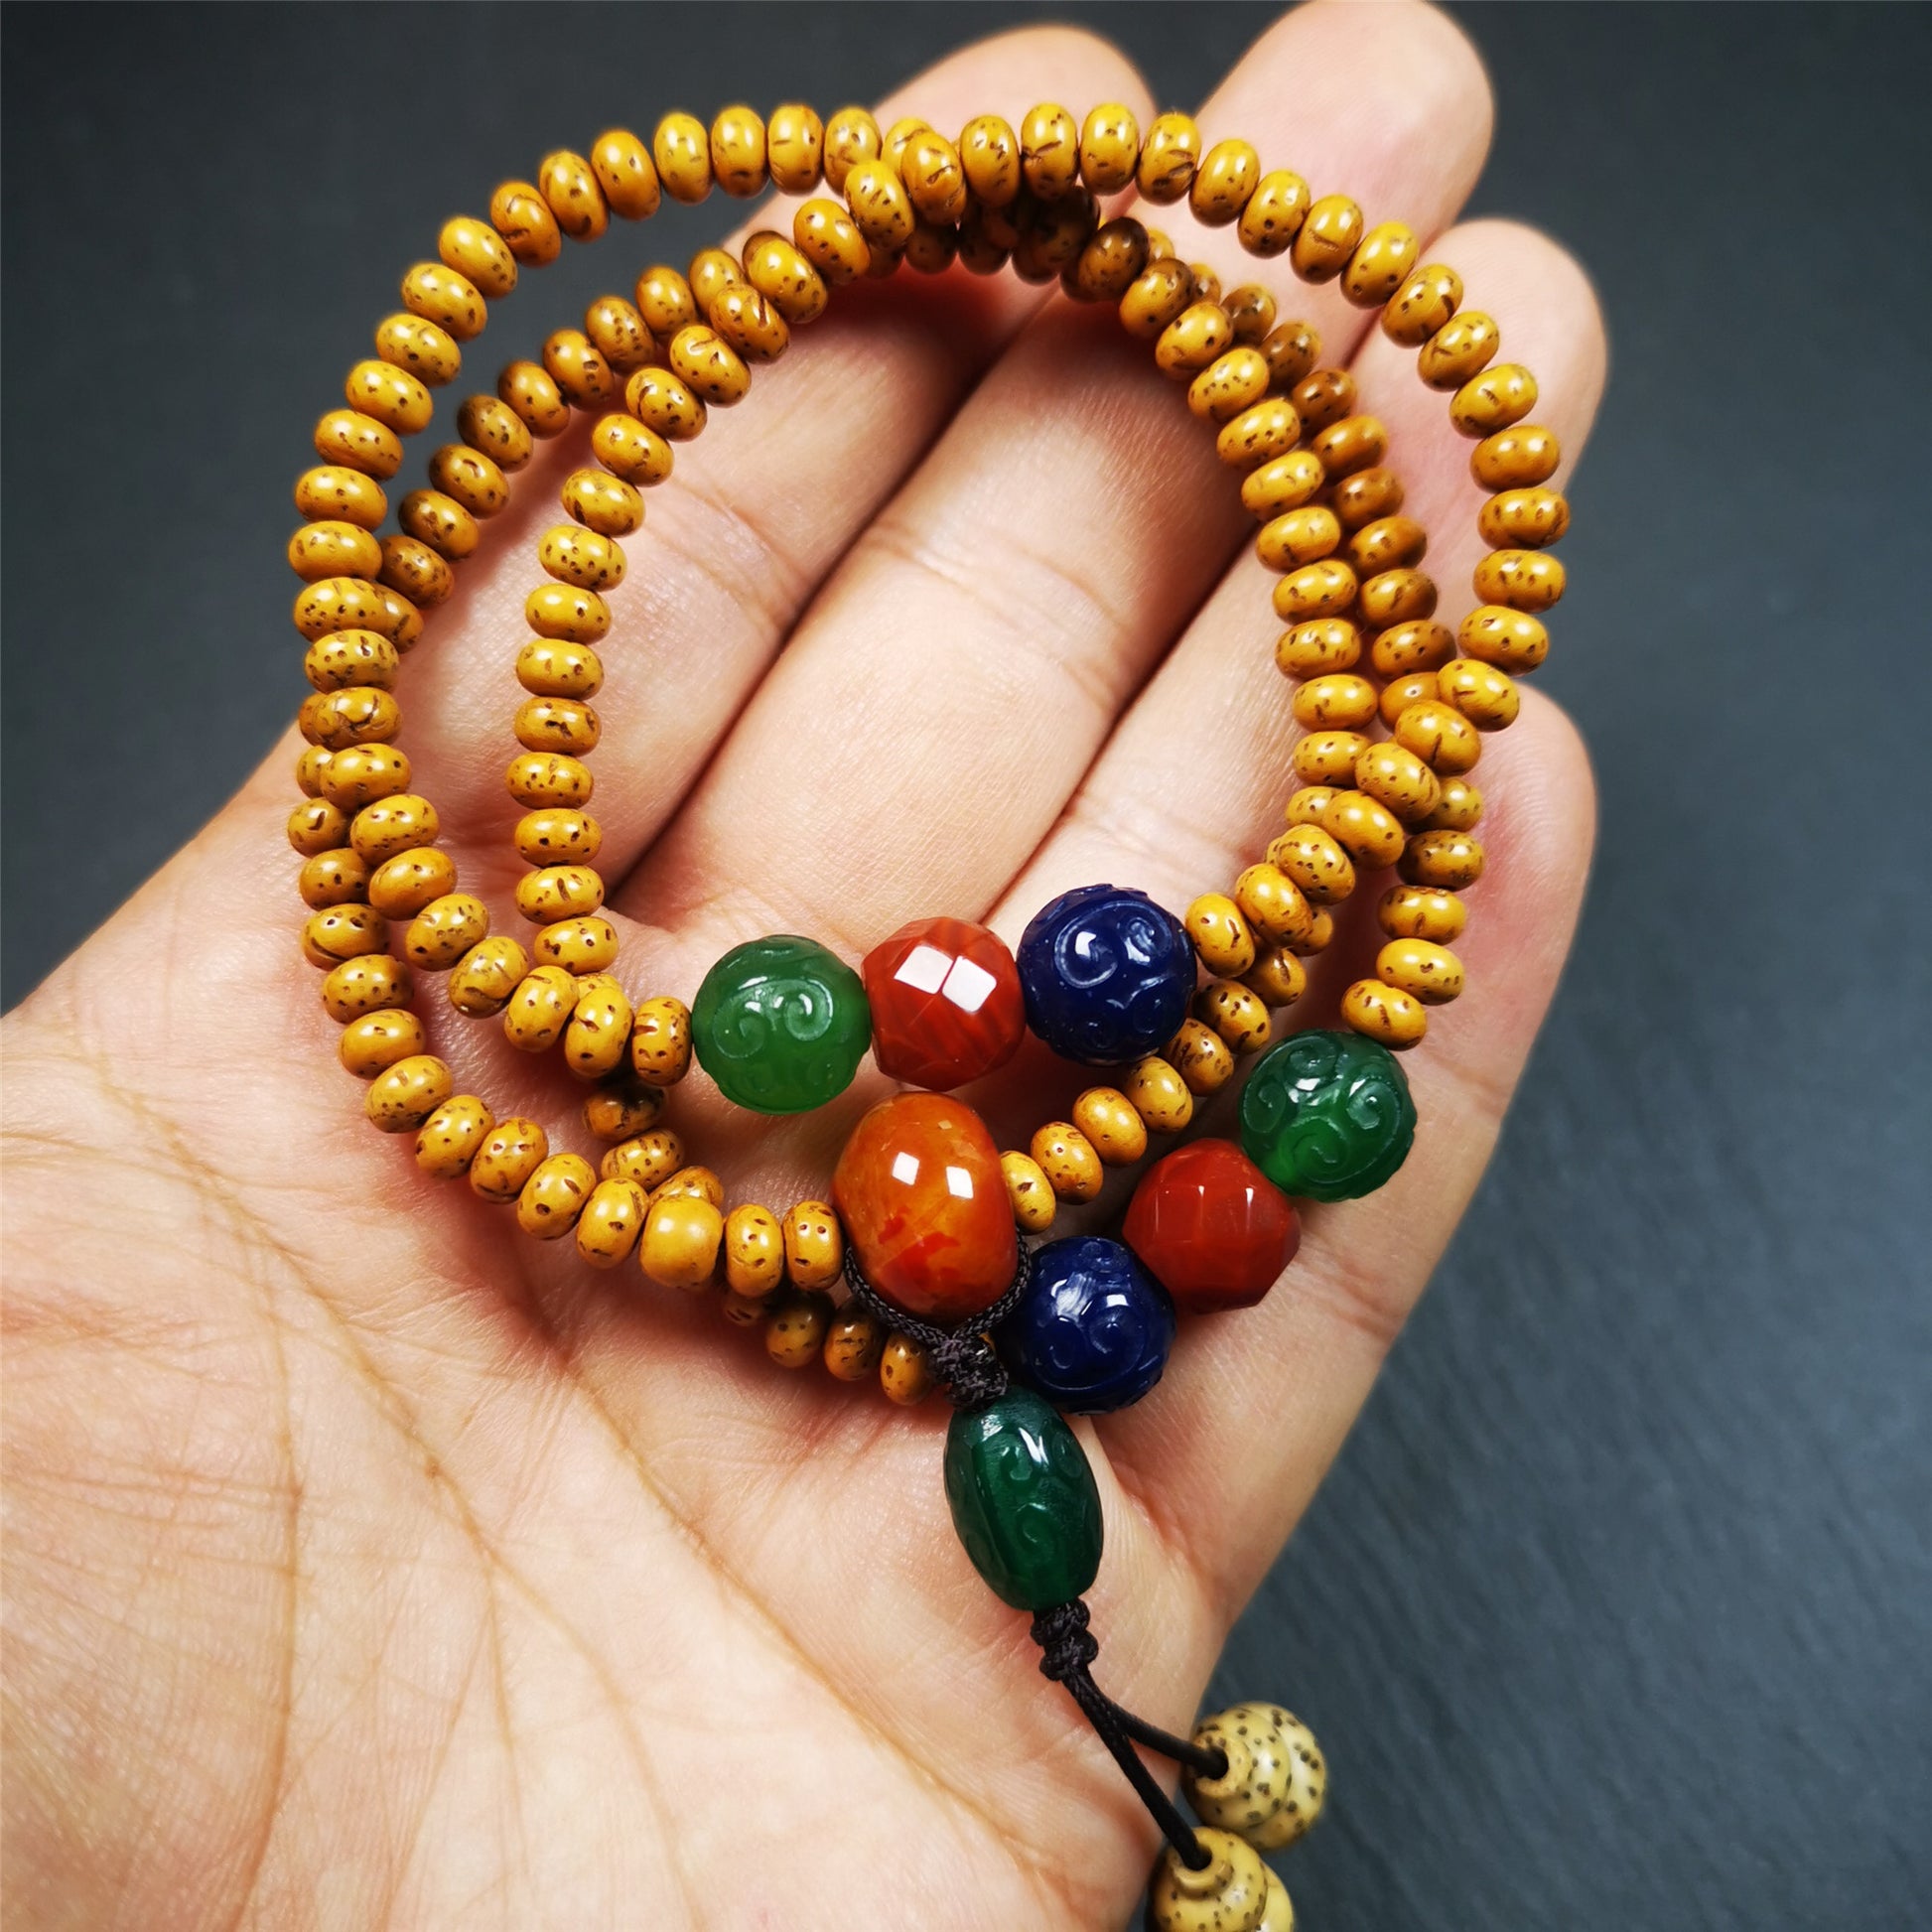 This mala is made by Tibetan craftsmen. It is composed of 108 lotus seed beads(5mm / 0.2"),perimeter is about 56cm,22inches.equipped with red, blue and green agates, very elegant.  It is worn with an elastic cord, so it fits the wrist very well, suitable for women to use as a bracelet mala